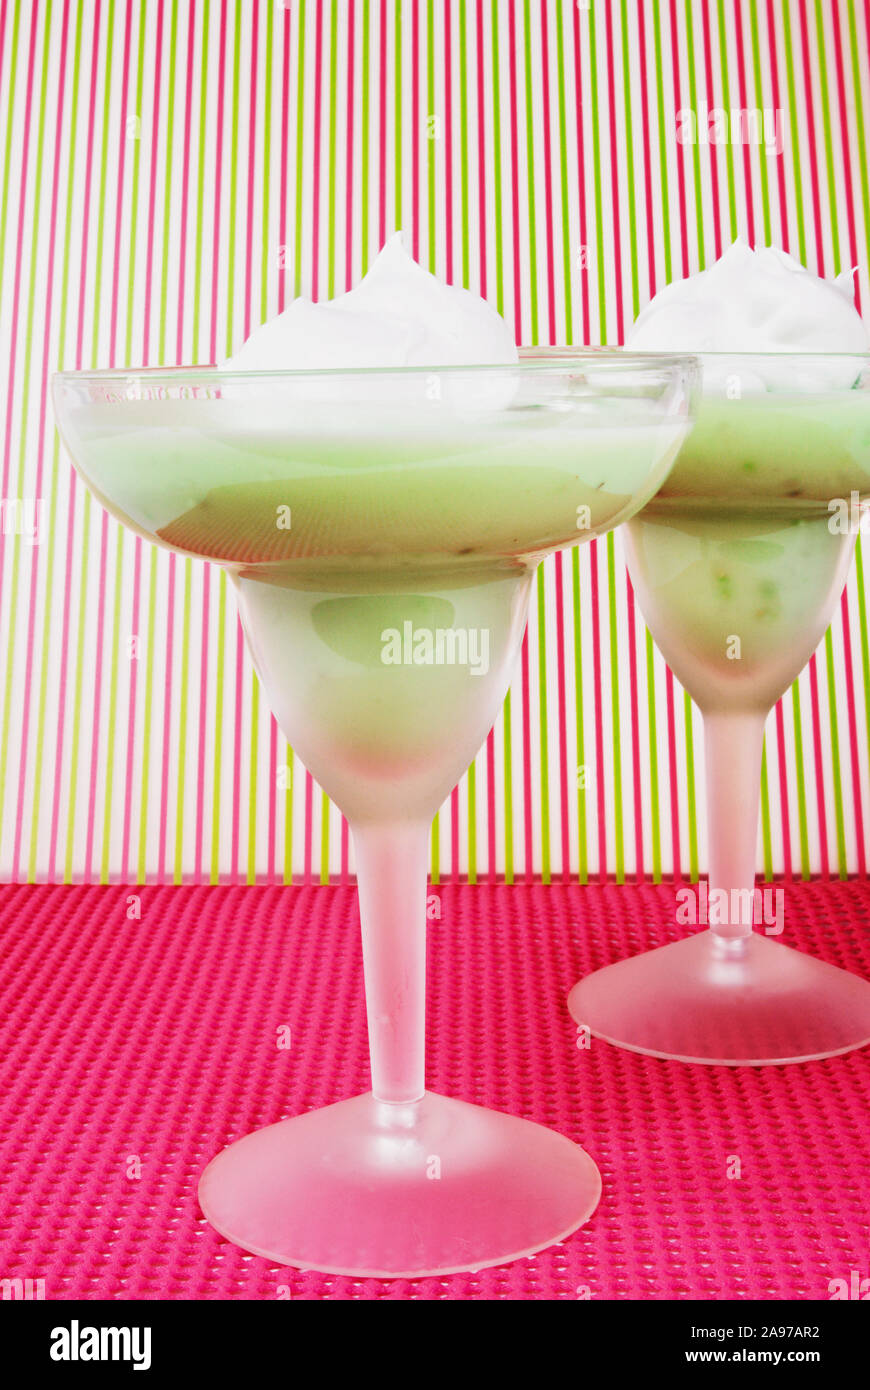 Eye level shot of homemade green colored pistachio pudding with a dollop of whipped cream on top served in two frosted margarita glasses. Naturally li Stock Photo